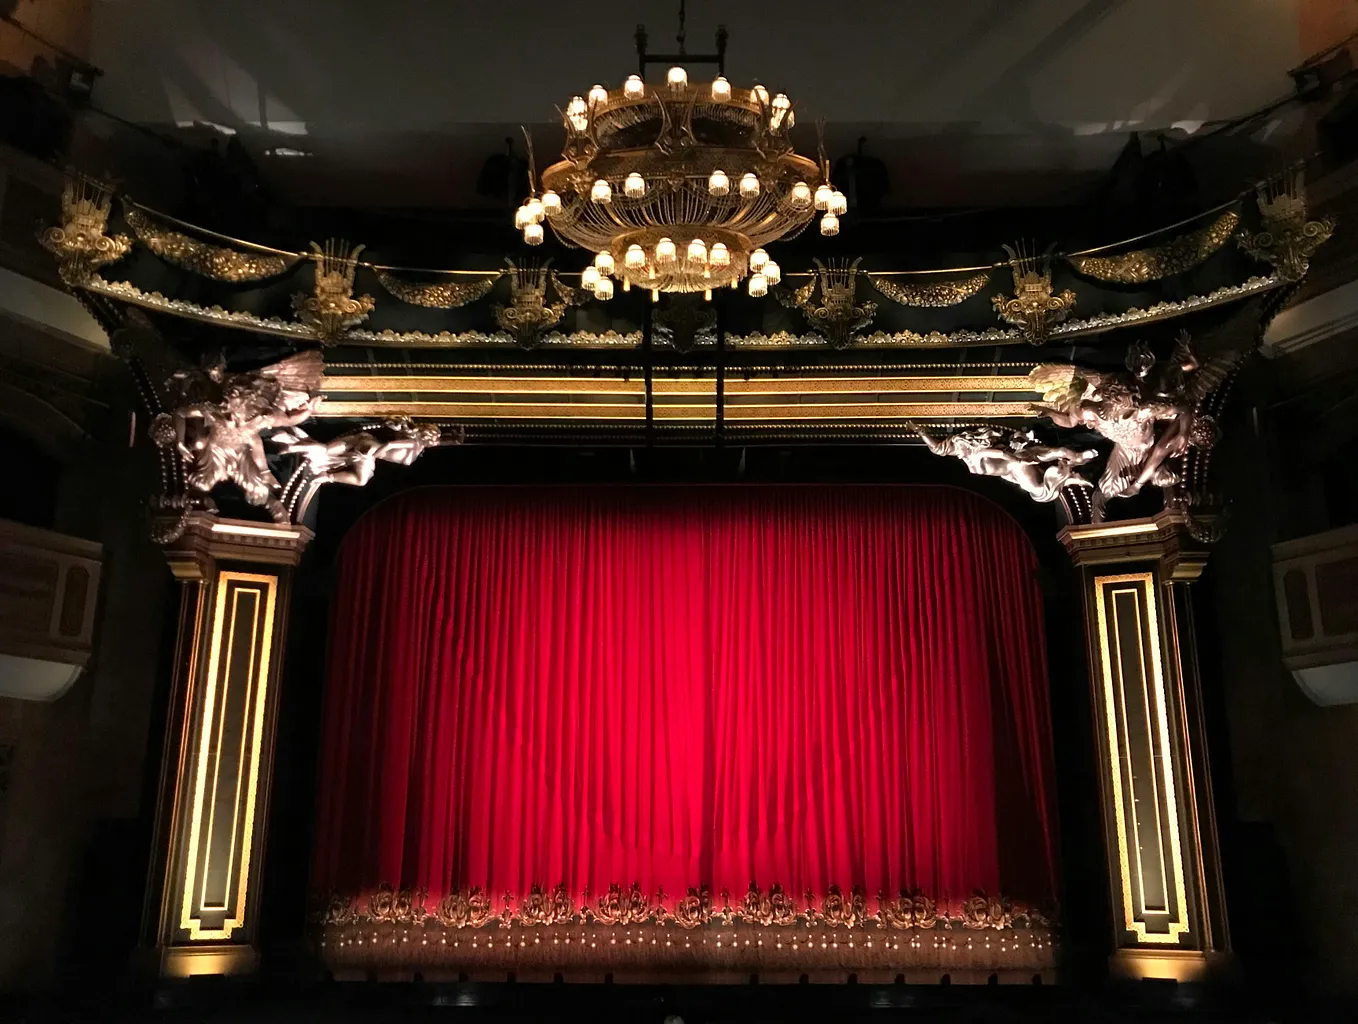 Theatre stage with red curtain, large candle chandelier hanging from the ceiling and gold framing around the stage